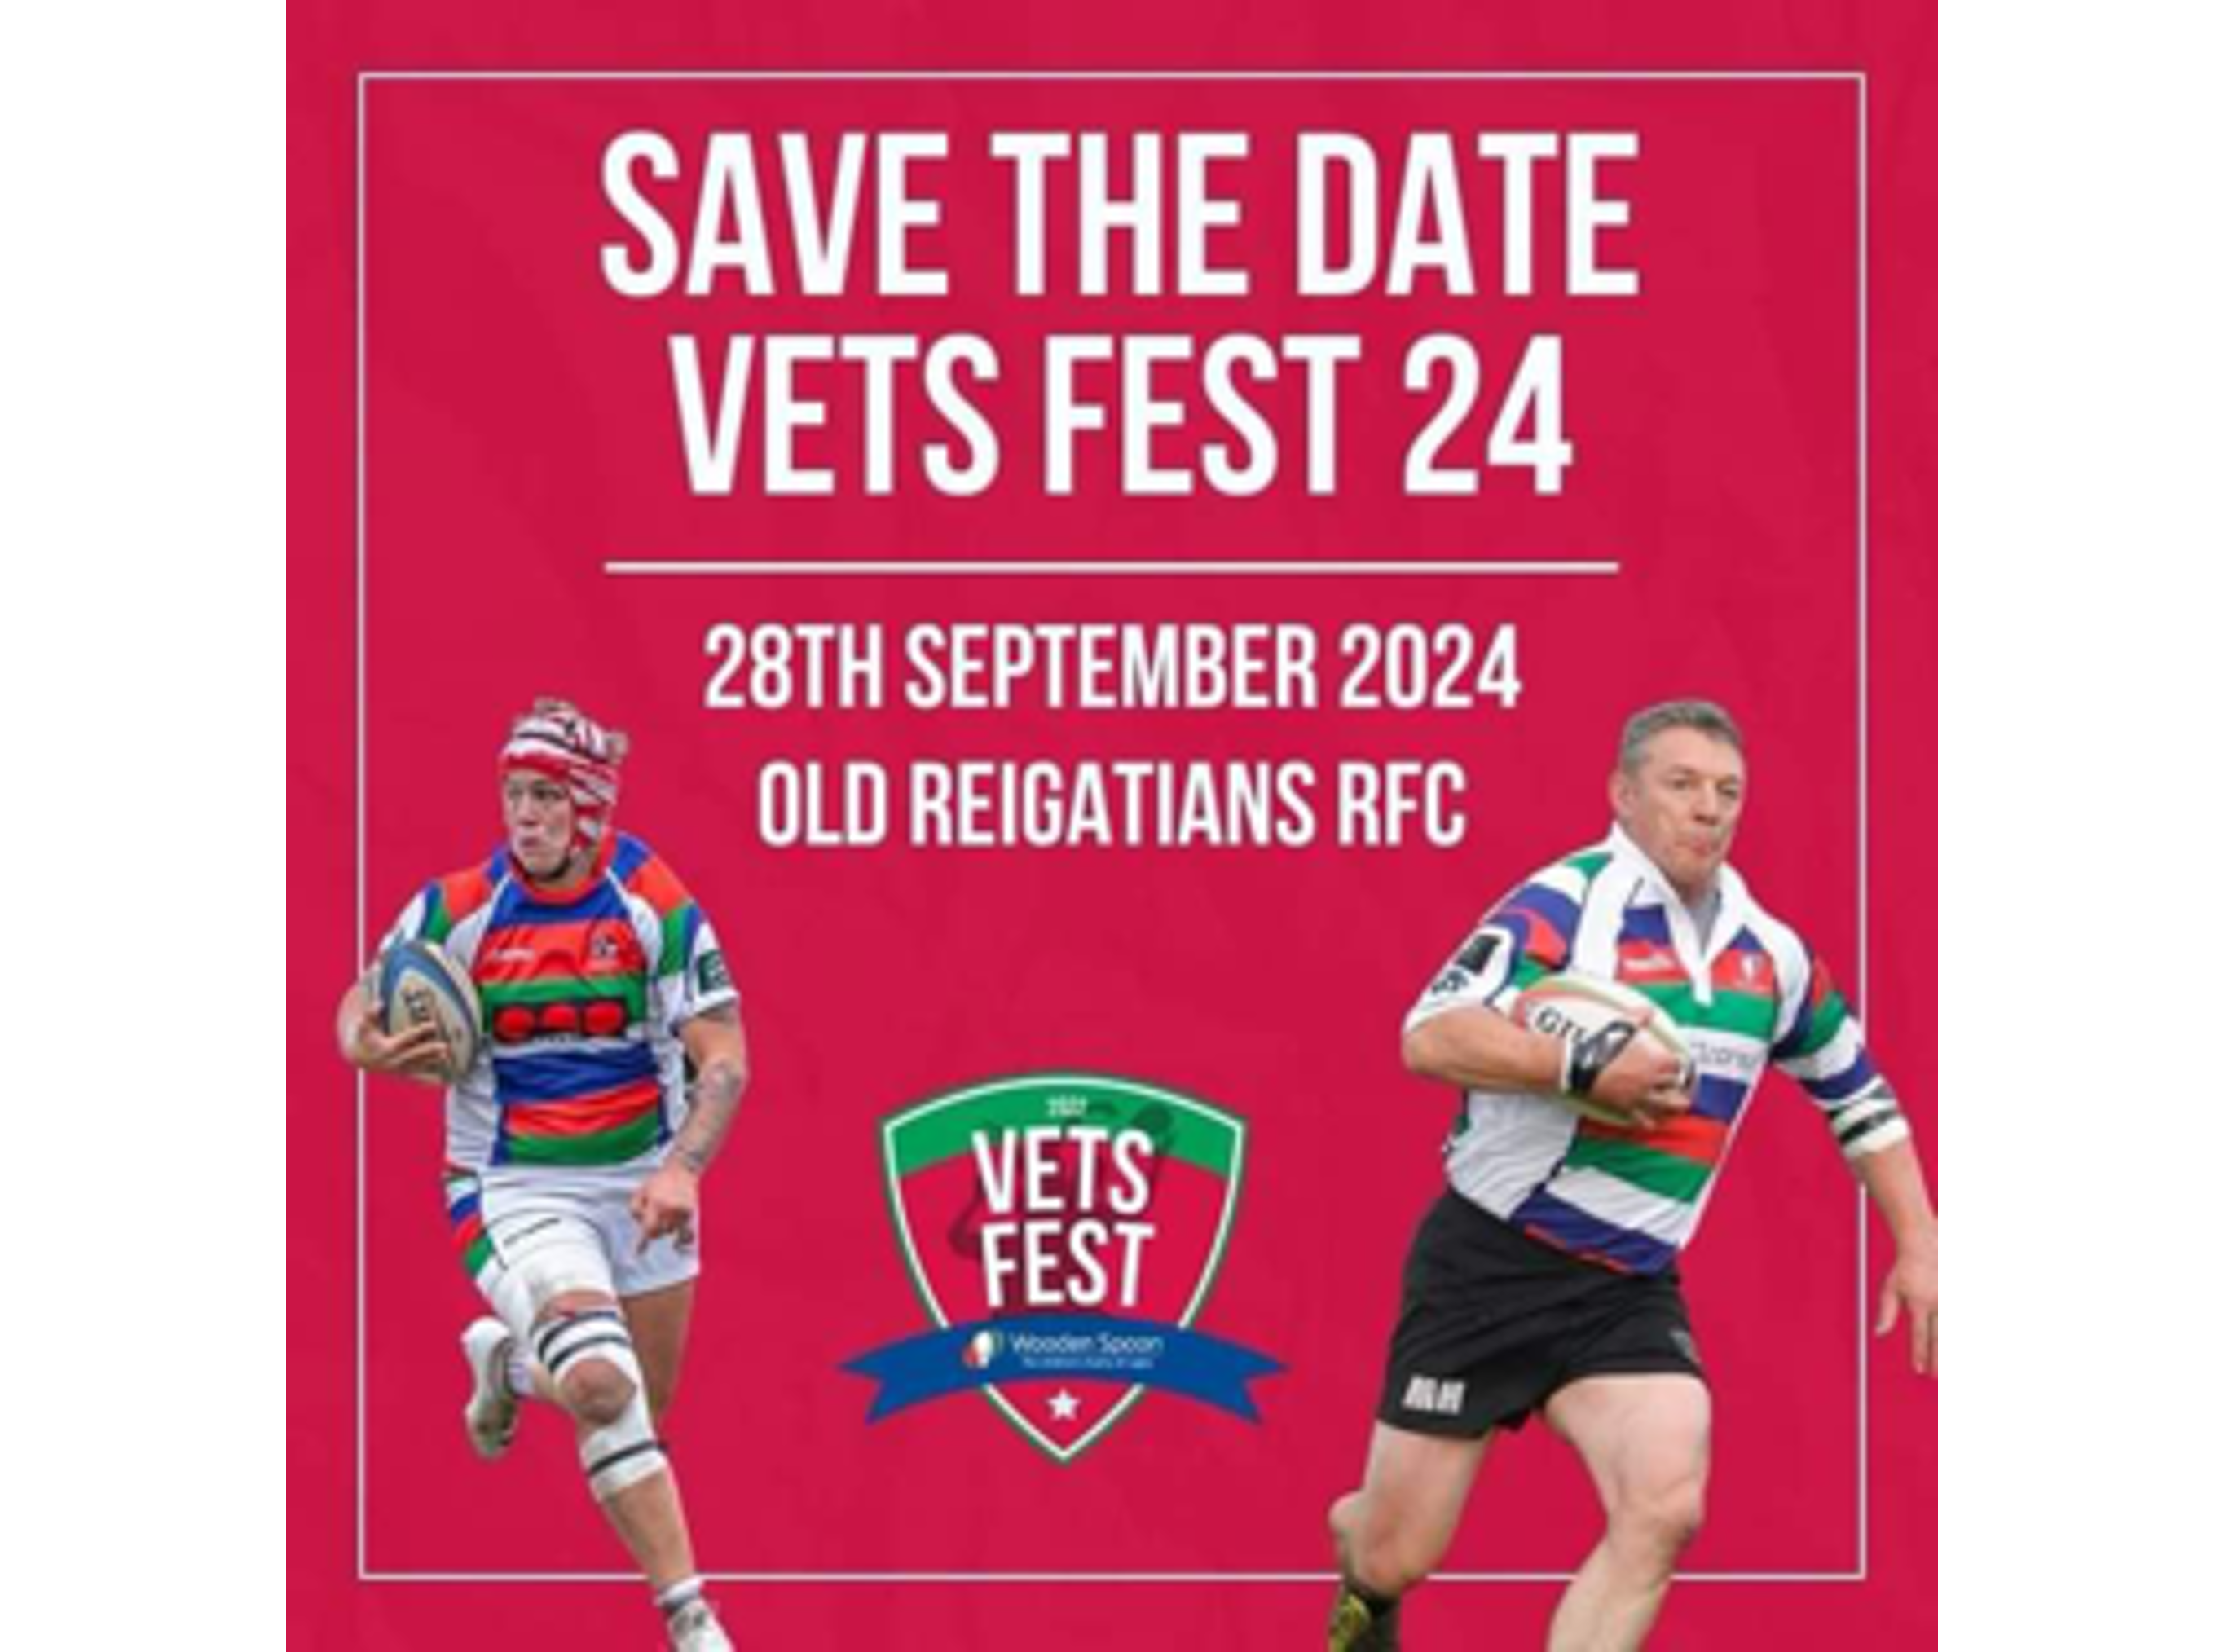 SAVE THE DATE! Vets Fest